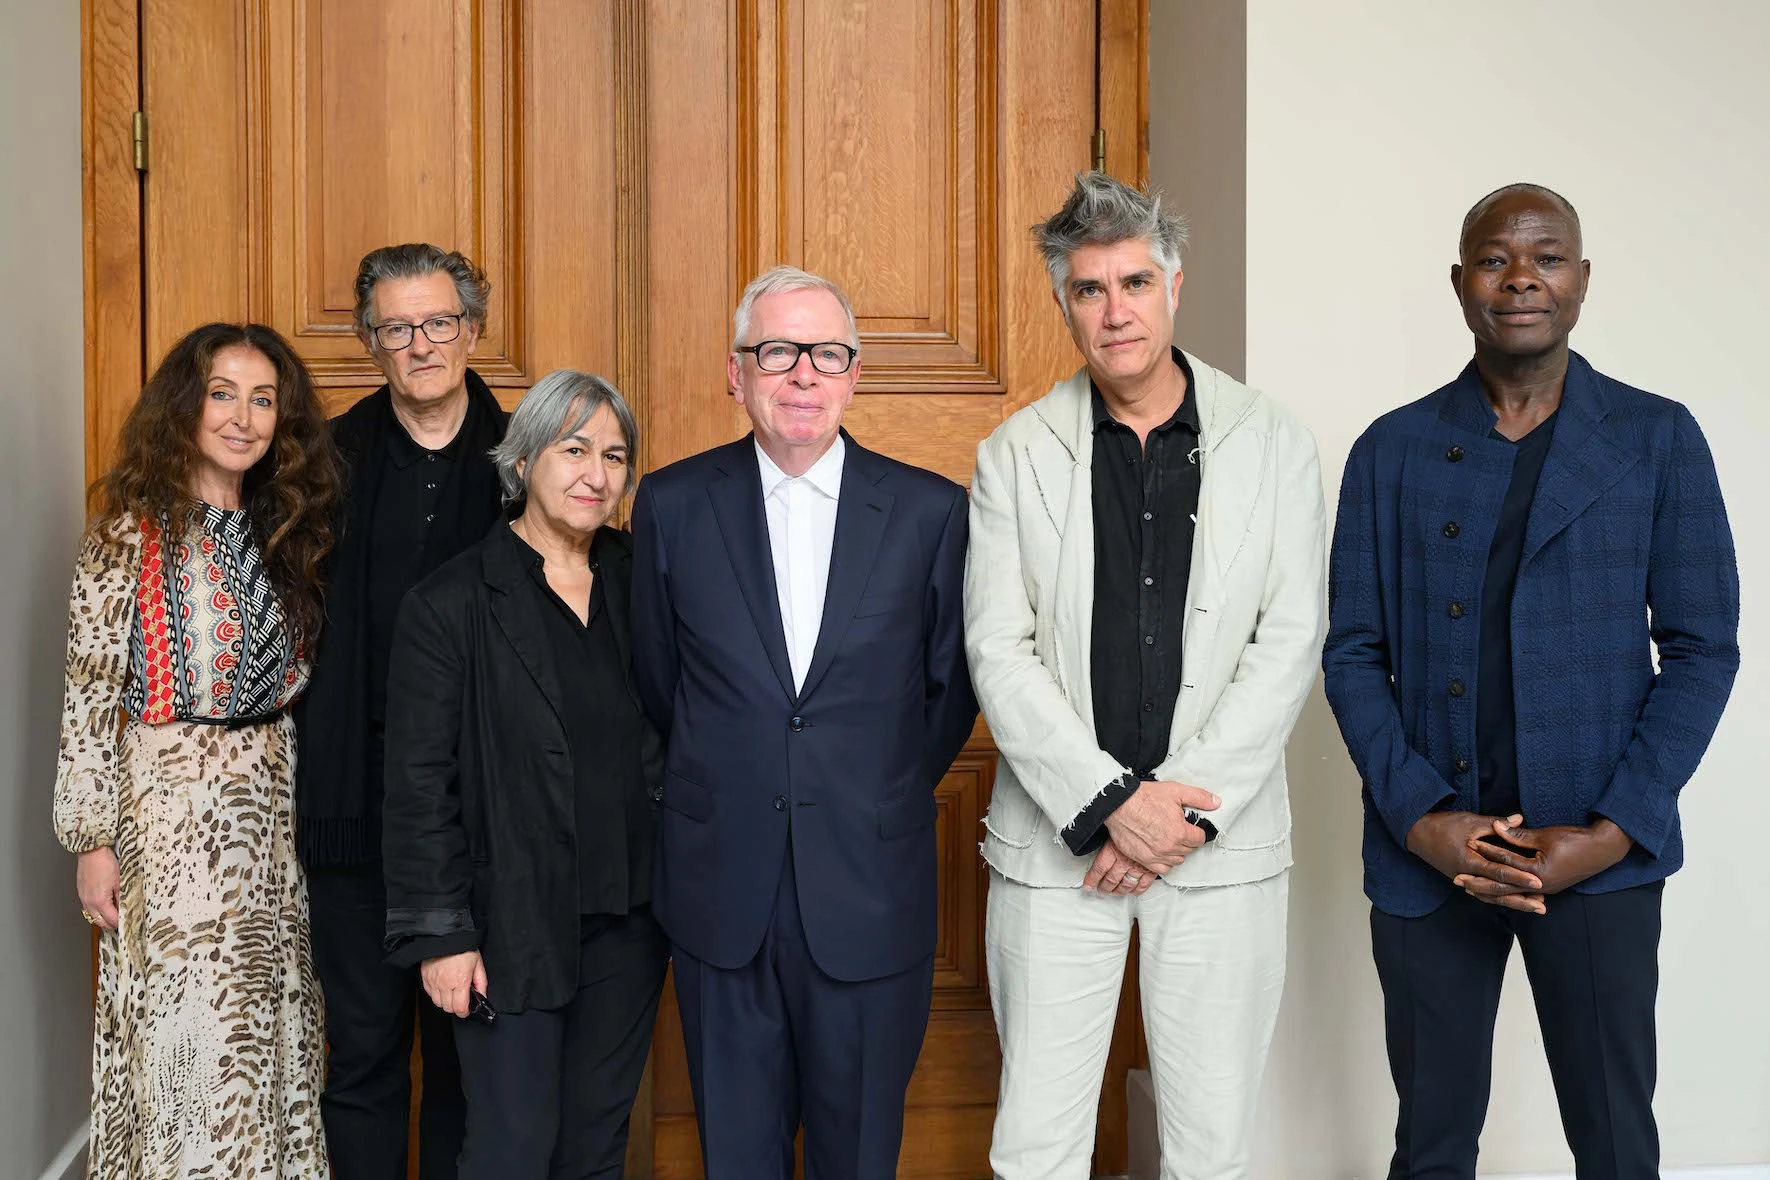 a group photo of pritzker prize officials and laureates.